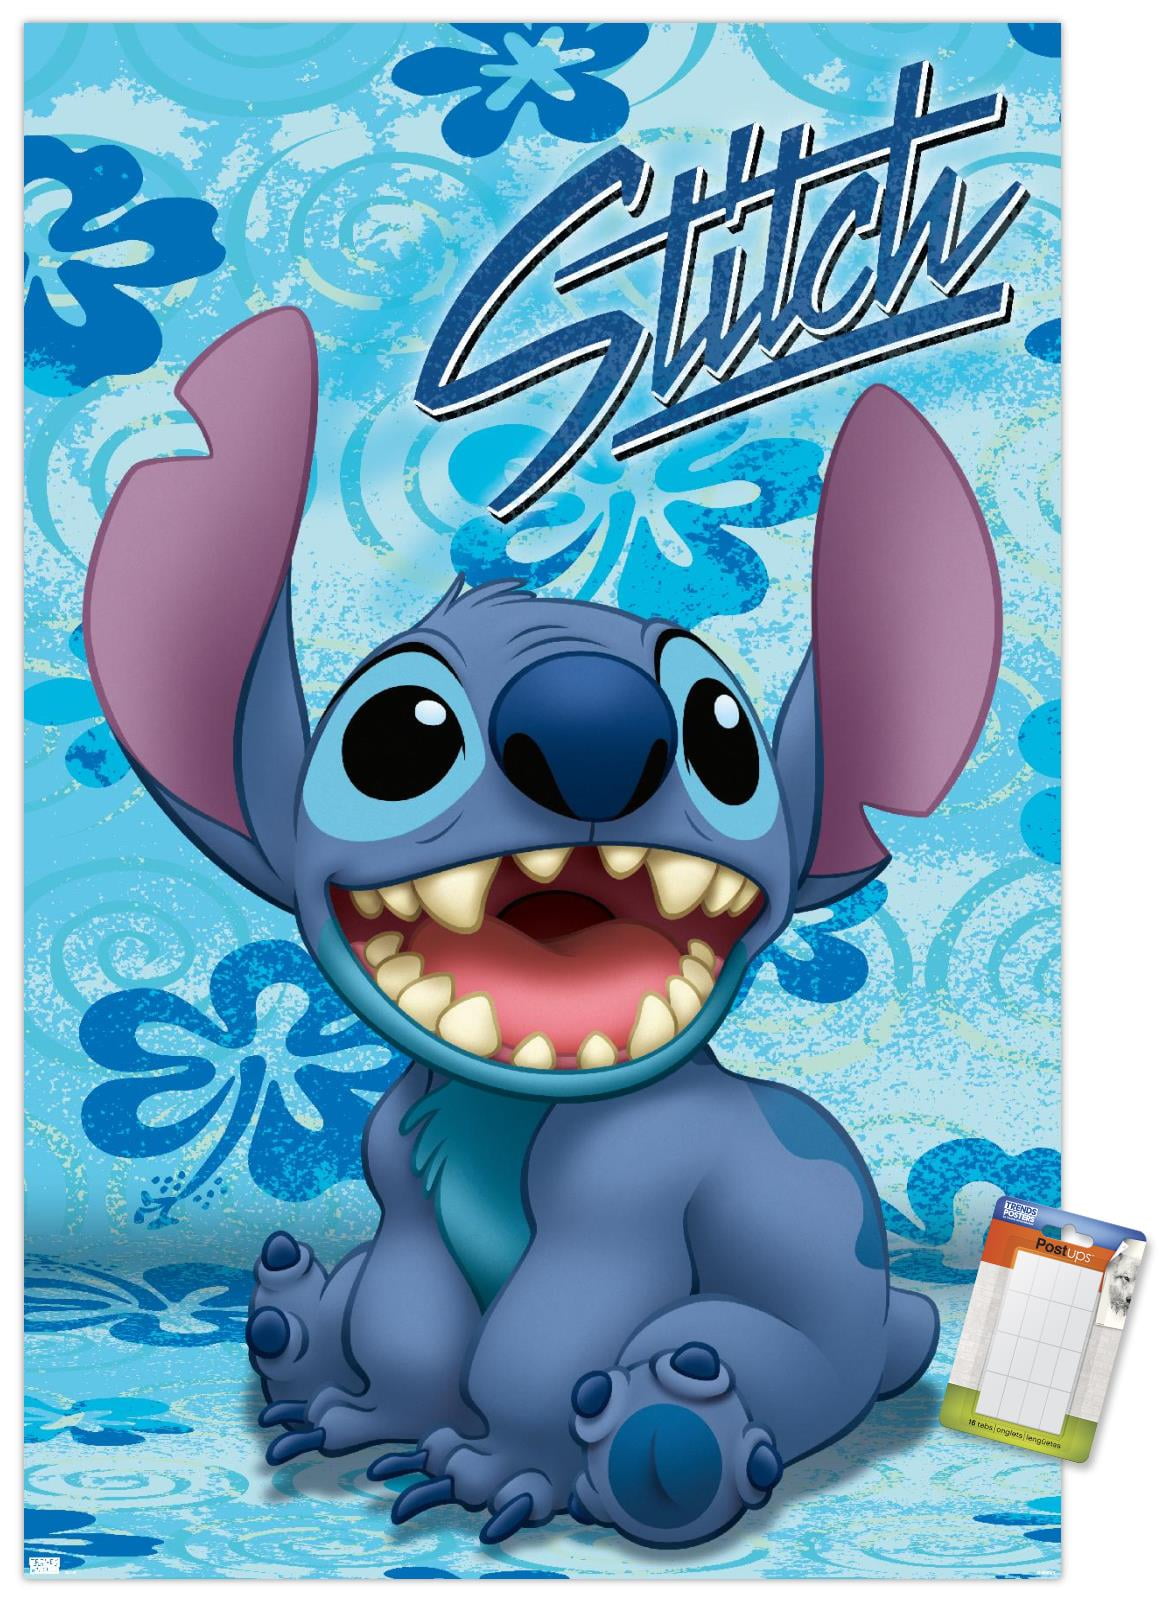 Disney Lilo & Stitch Coloring and Activity Book NEW